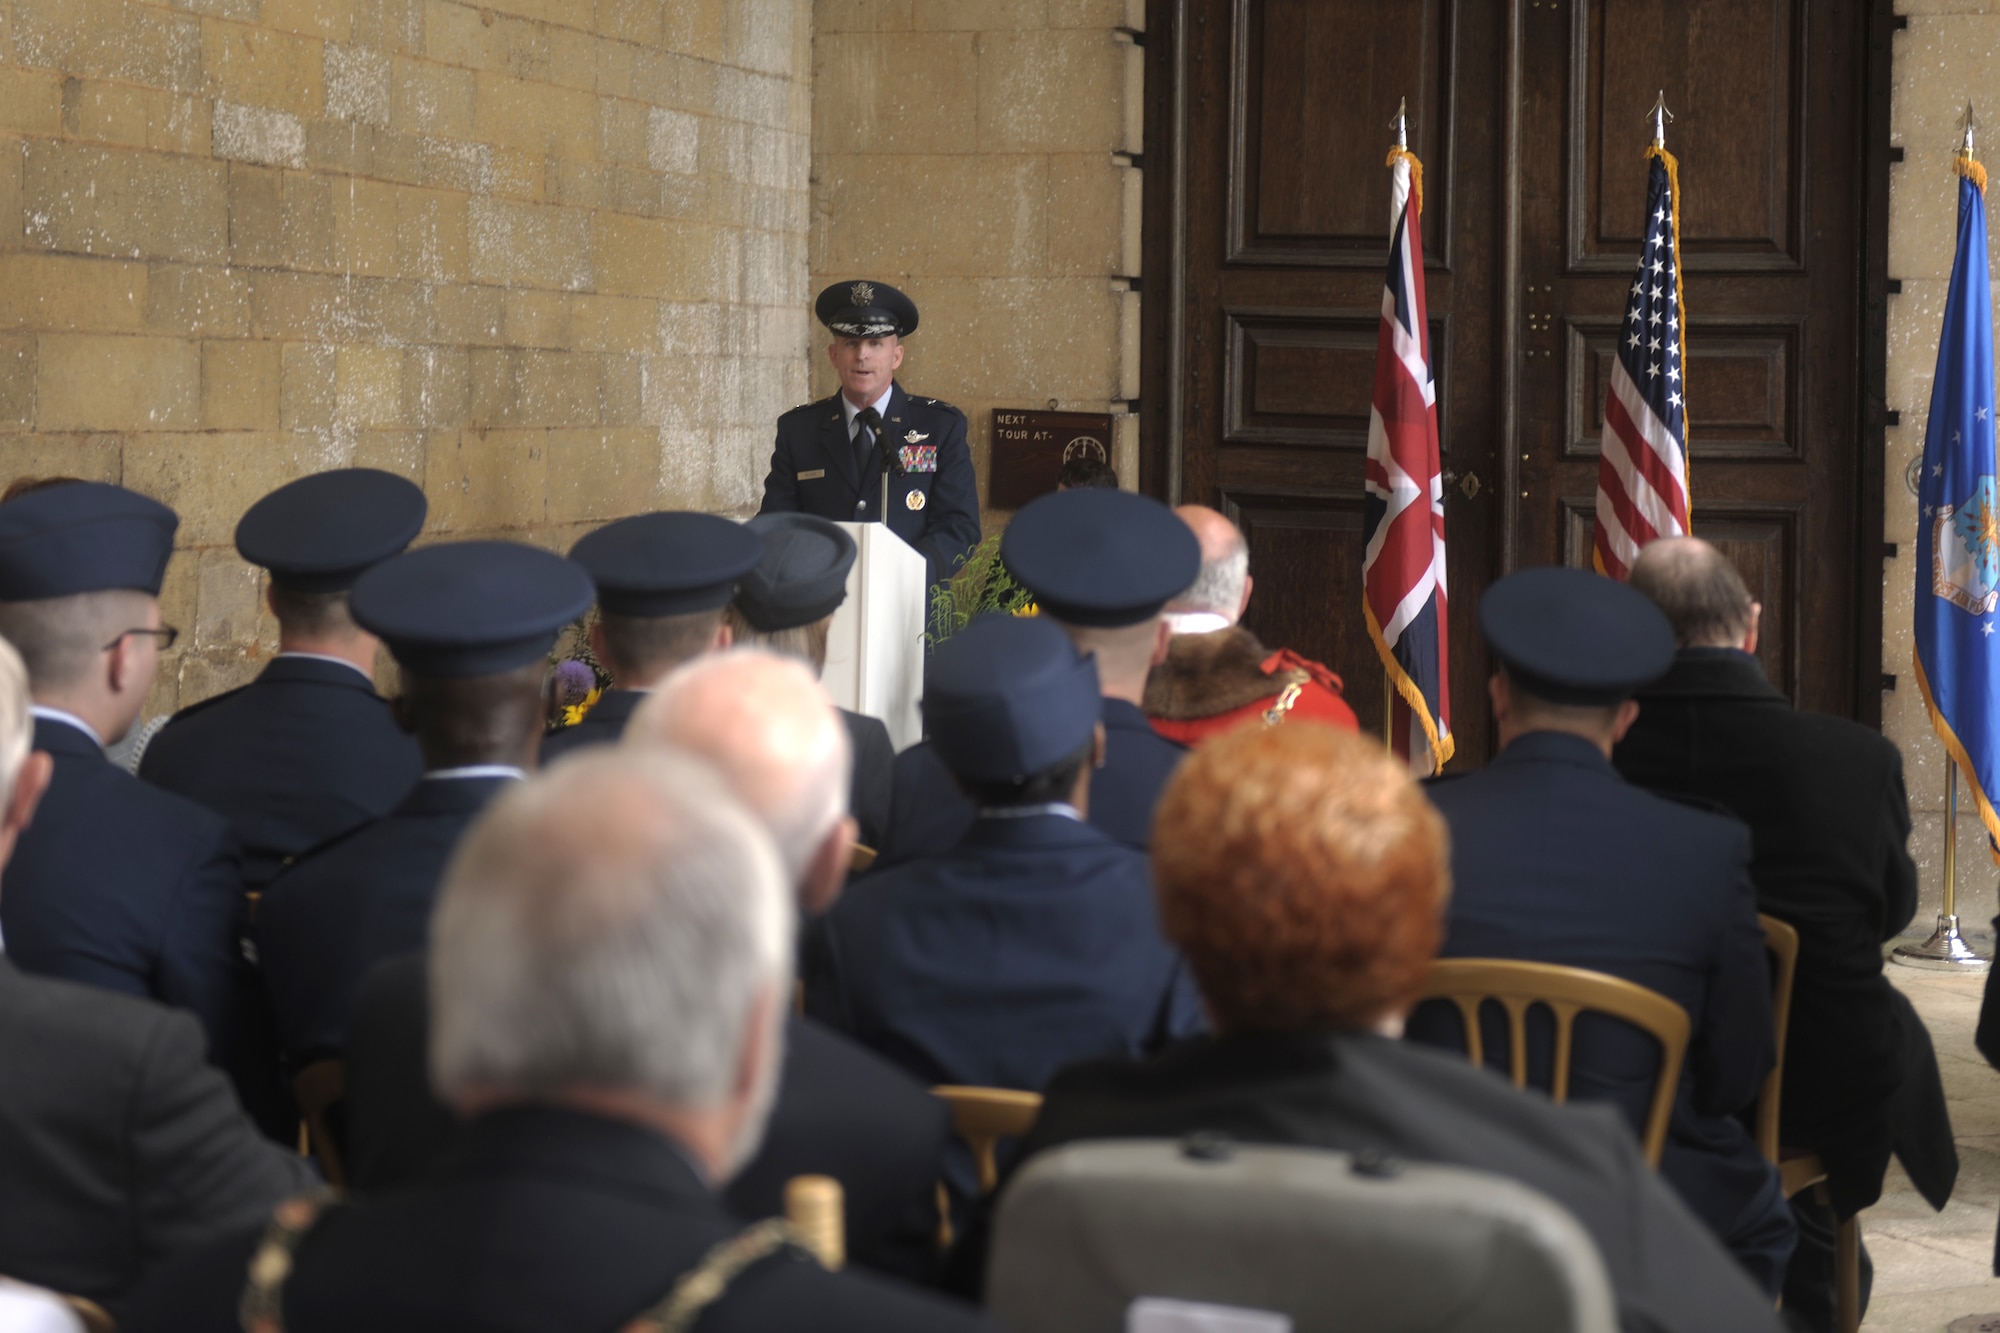 GRAFTON UNDERWOOD, United Kingdom – Maj. Gen. Stephen Wilson, Eighth Air Force commander, speaks to a crowd of more than 200, including Royal Air Force Air Commodore R.L. Atherton, representing the United Kingdom Ministry of Defence and Air Chief Marshall Sir Stephen Dalton, RAF Chief of Air Staff; Col. Brian Kelly, 501st Combat Support Wing commander; local community leaders from Kettering, United Kingdom; and veterans at Boughton House Aug. 17. The day marked the 70th anniversary of the first Eighth Air Force bombers, from the 97th Bombardment Group (Heavy), participating in World War II which launched from Grafton Underwood. Col. Frank Armstrong, 97th BG commander, and the 340th Bomb Squadron commander Maj. Paul Tibbets (who later flew the Enola Gay to Hiroshima, Japan, on the first atomic bomb mission) piloted the lead aircraft of the group, Butcher Shop. In the leading aircraft of the second flight, Yankee Doodle, flew Gen. Ira C. Eaker, the commanding general of the VIII Bomber Command. (U.S. Air Force photo by Staff Sgt. Brian Stives)